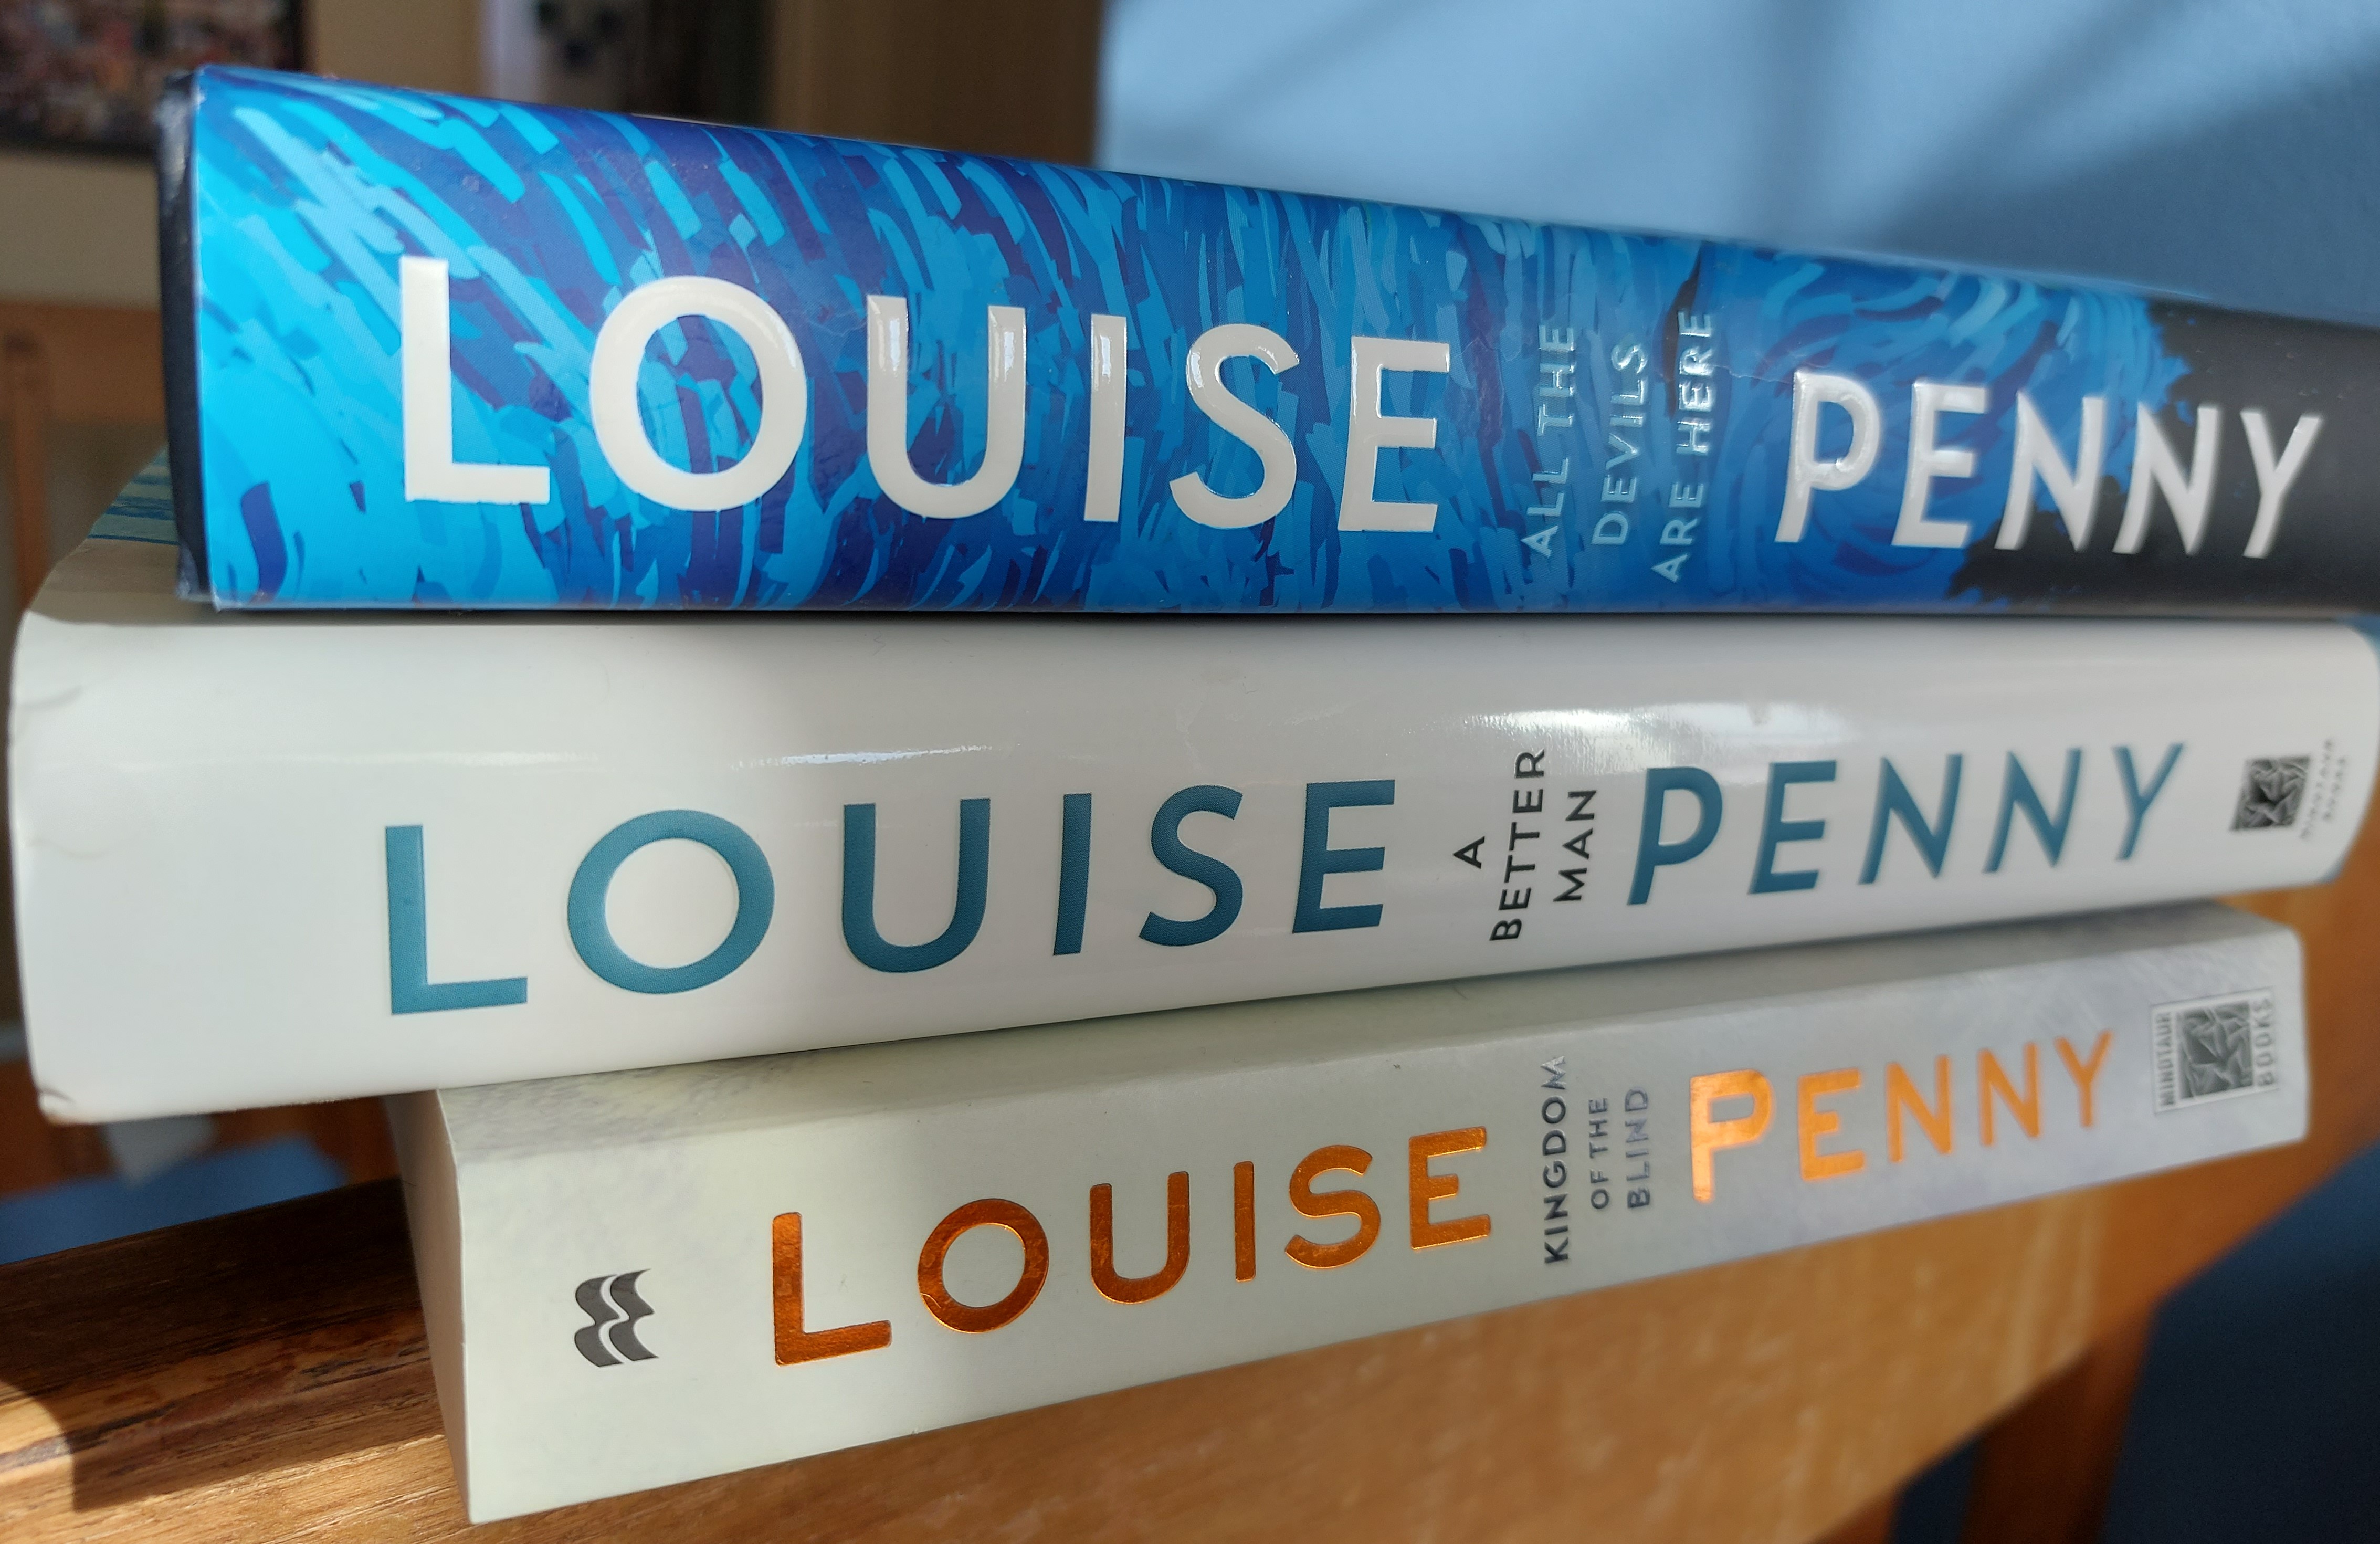 Chief Inspector Gamache Book Series in Order: How to read Louise Penny  novels series? Chronological order See more